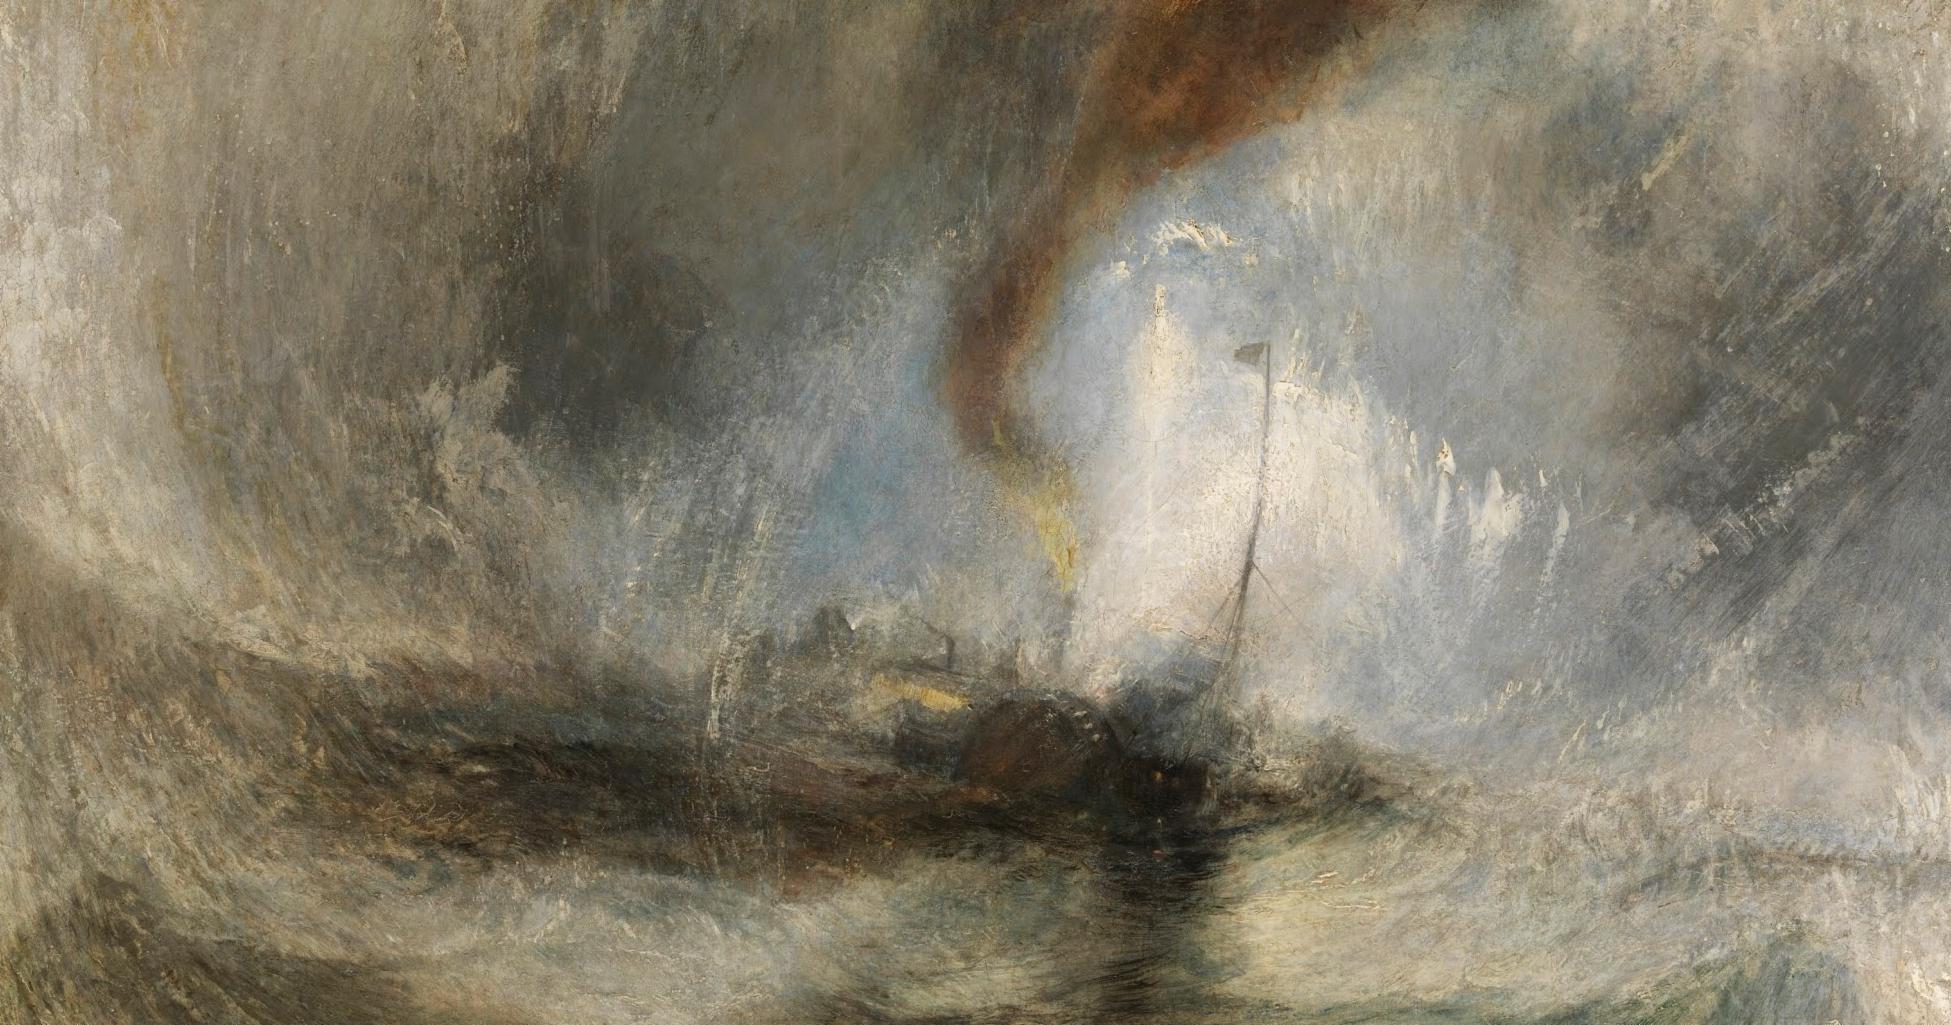 What You Need to Know about J.M.W. Turner, Britain's Great Painter